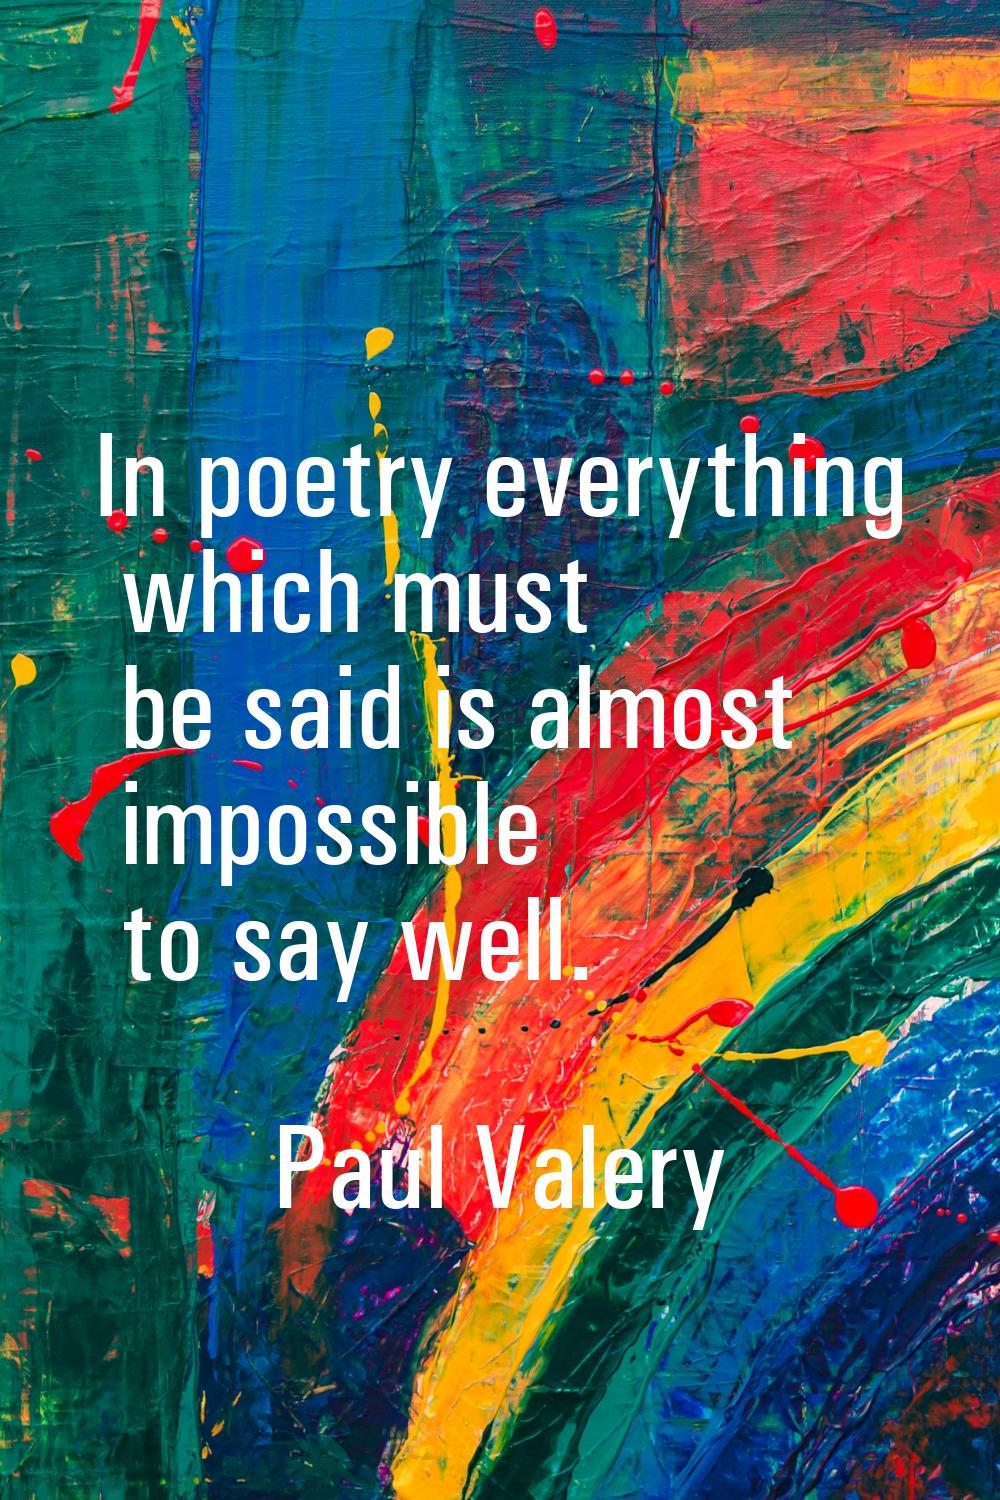 In poetry everything which must be said is almost impossible to say well.